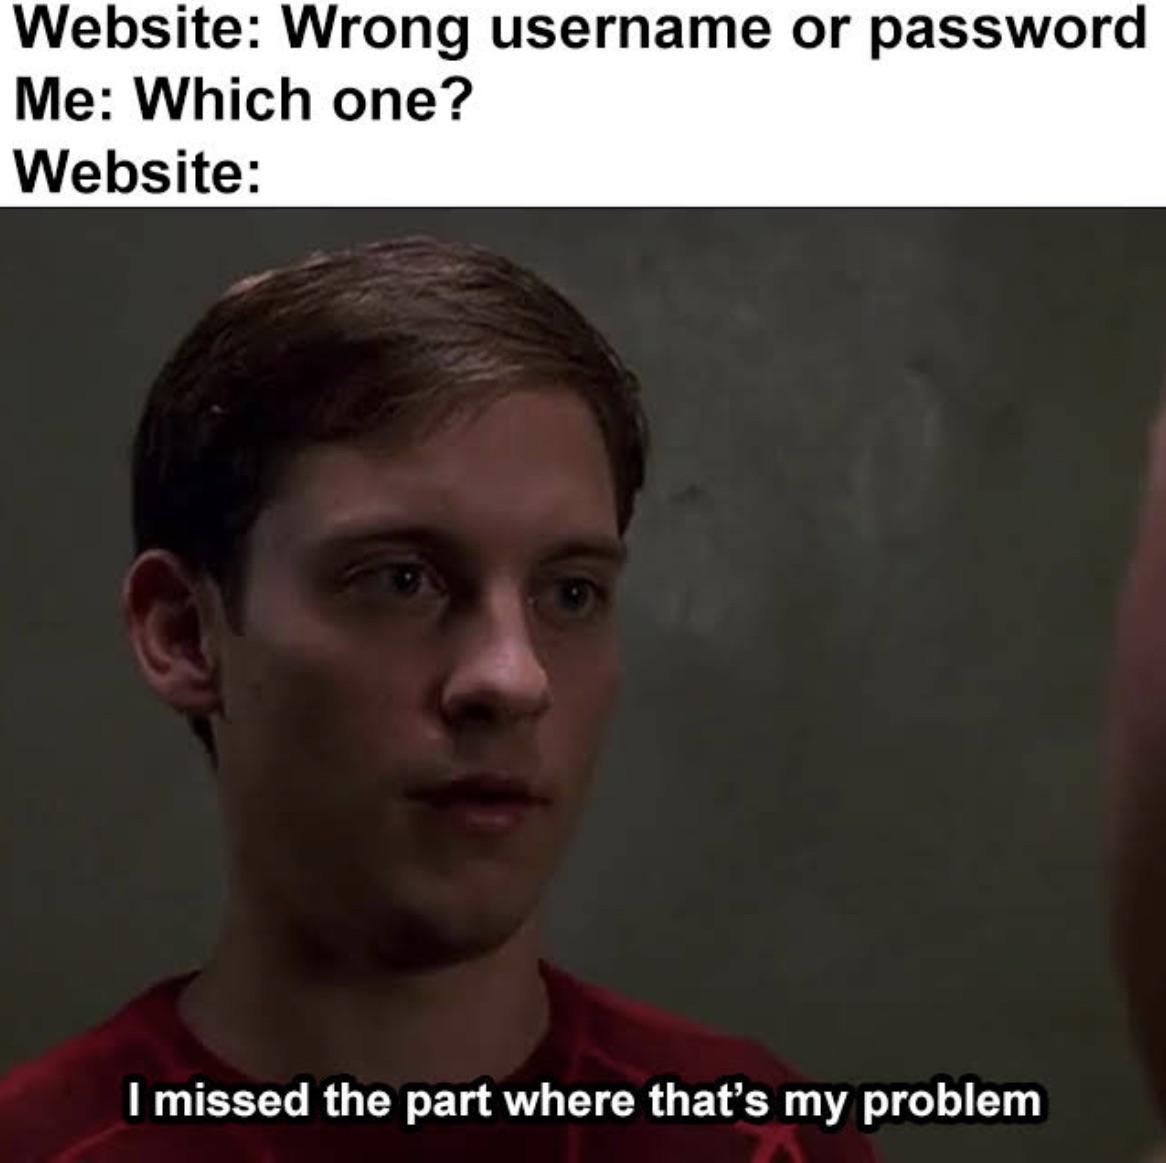 funny gaming memes - password protection - Website Wrong username or password Me Which one? Website I missed the part where that's my problem